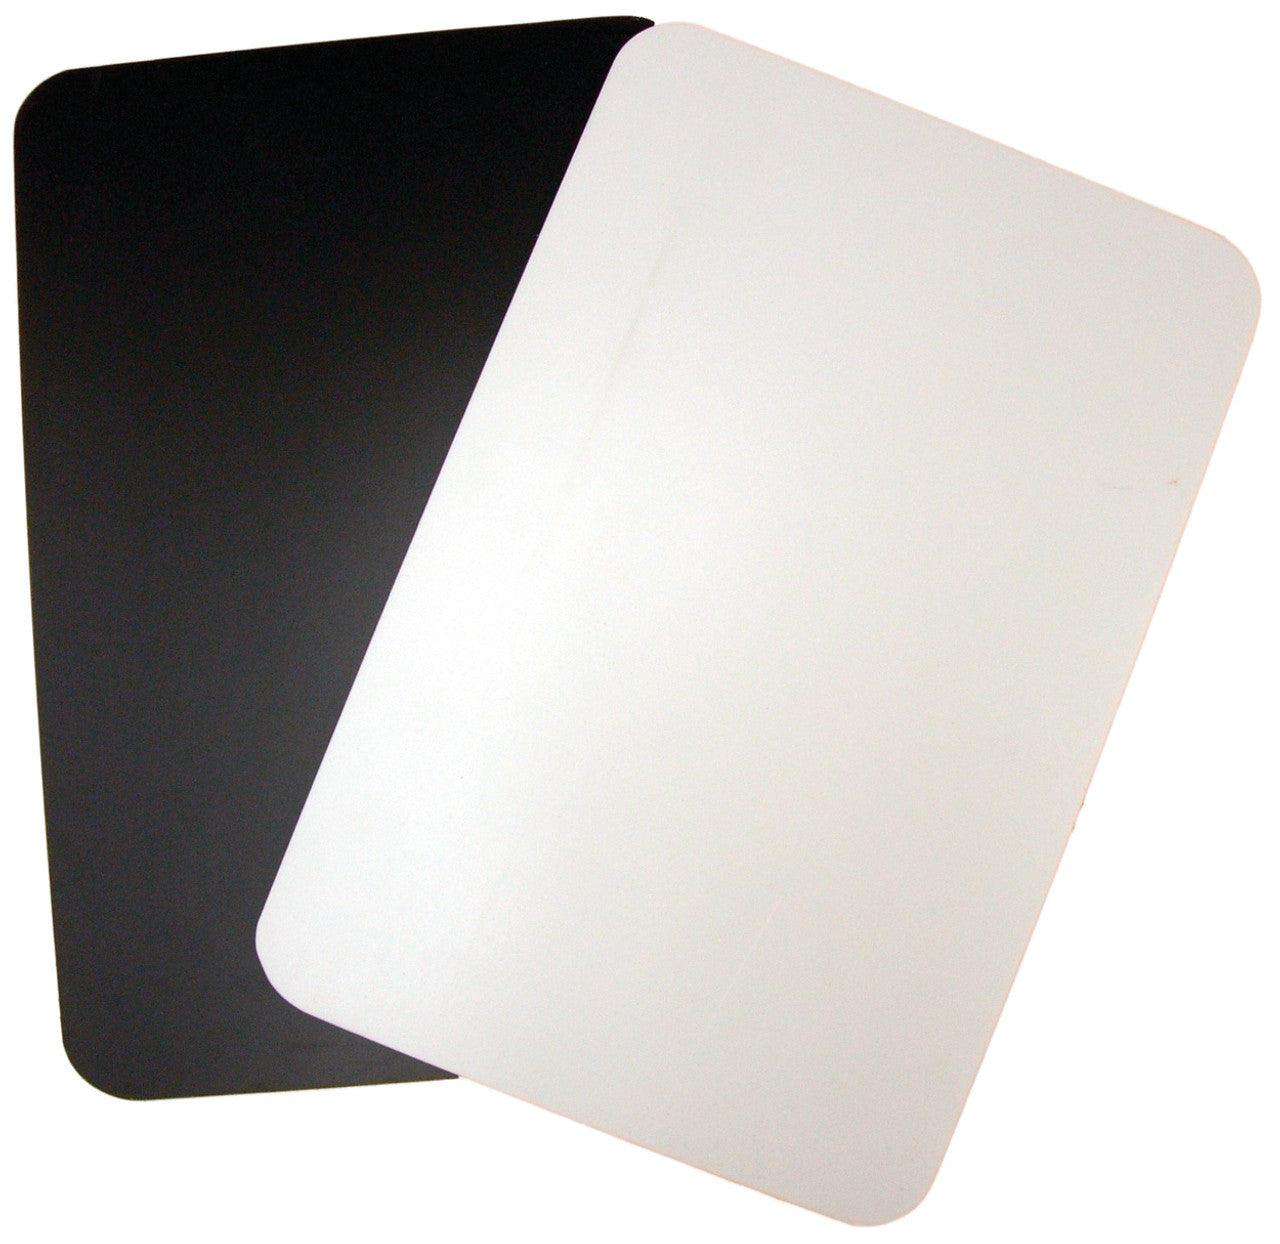 Low Vision Black and White Cutting Board - The Low Vision Store